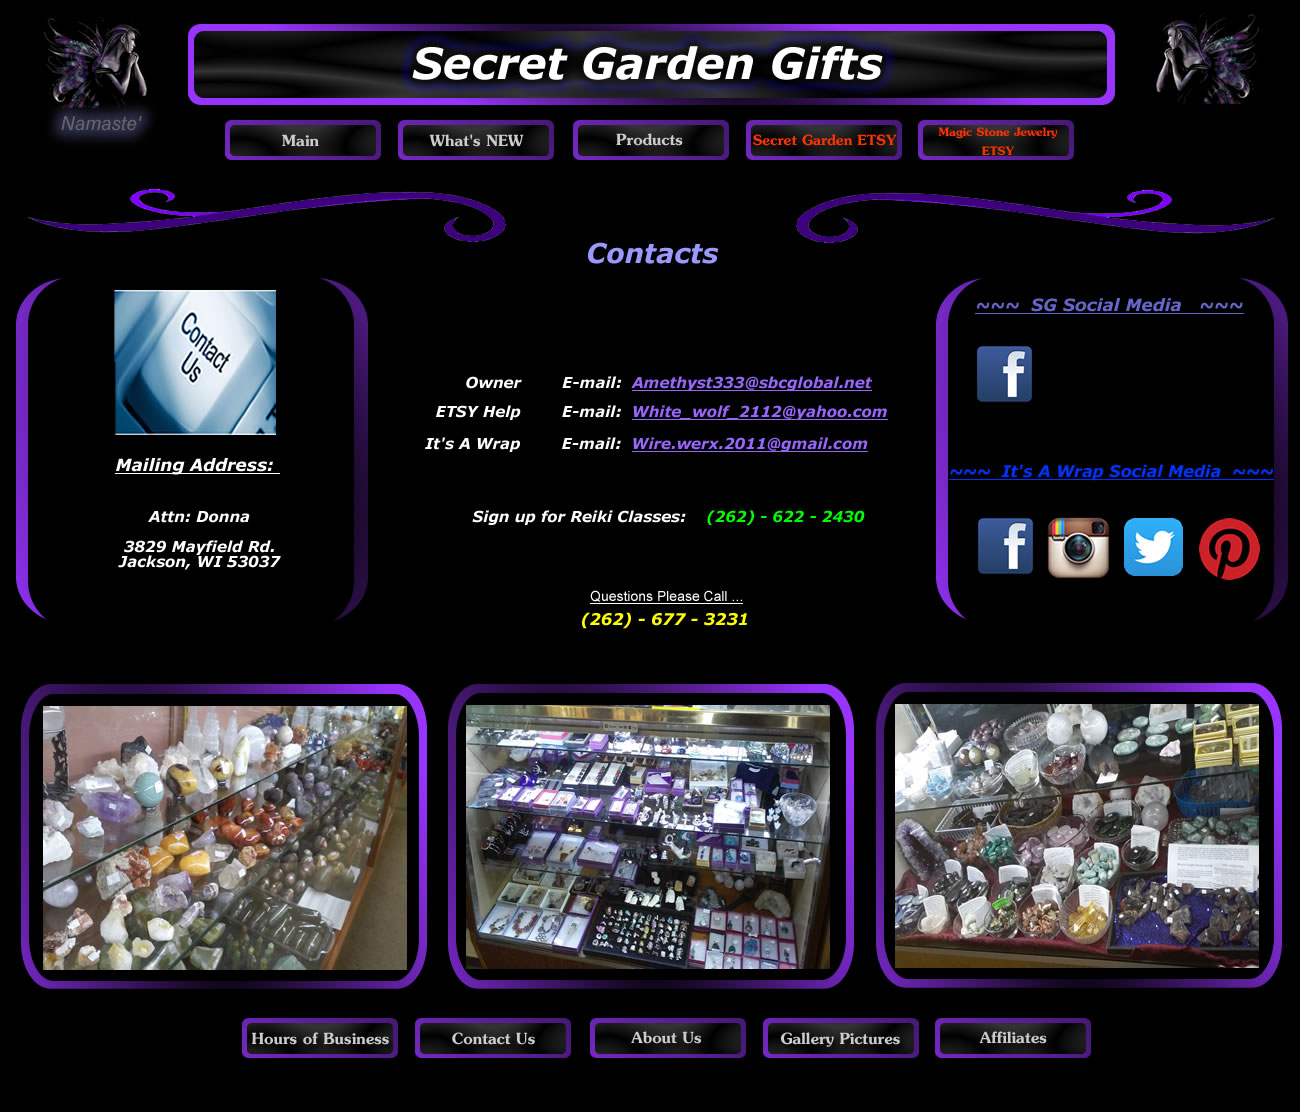 Contacts For Secret Garden Gifts